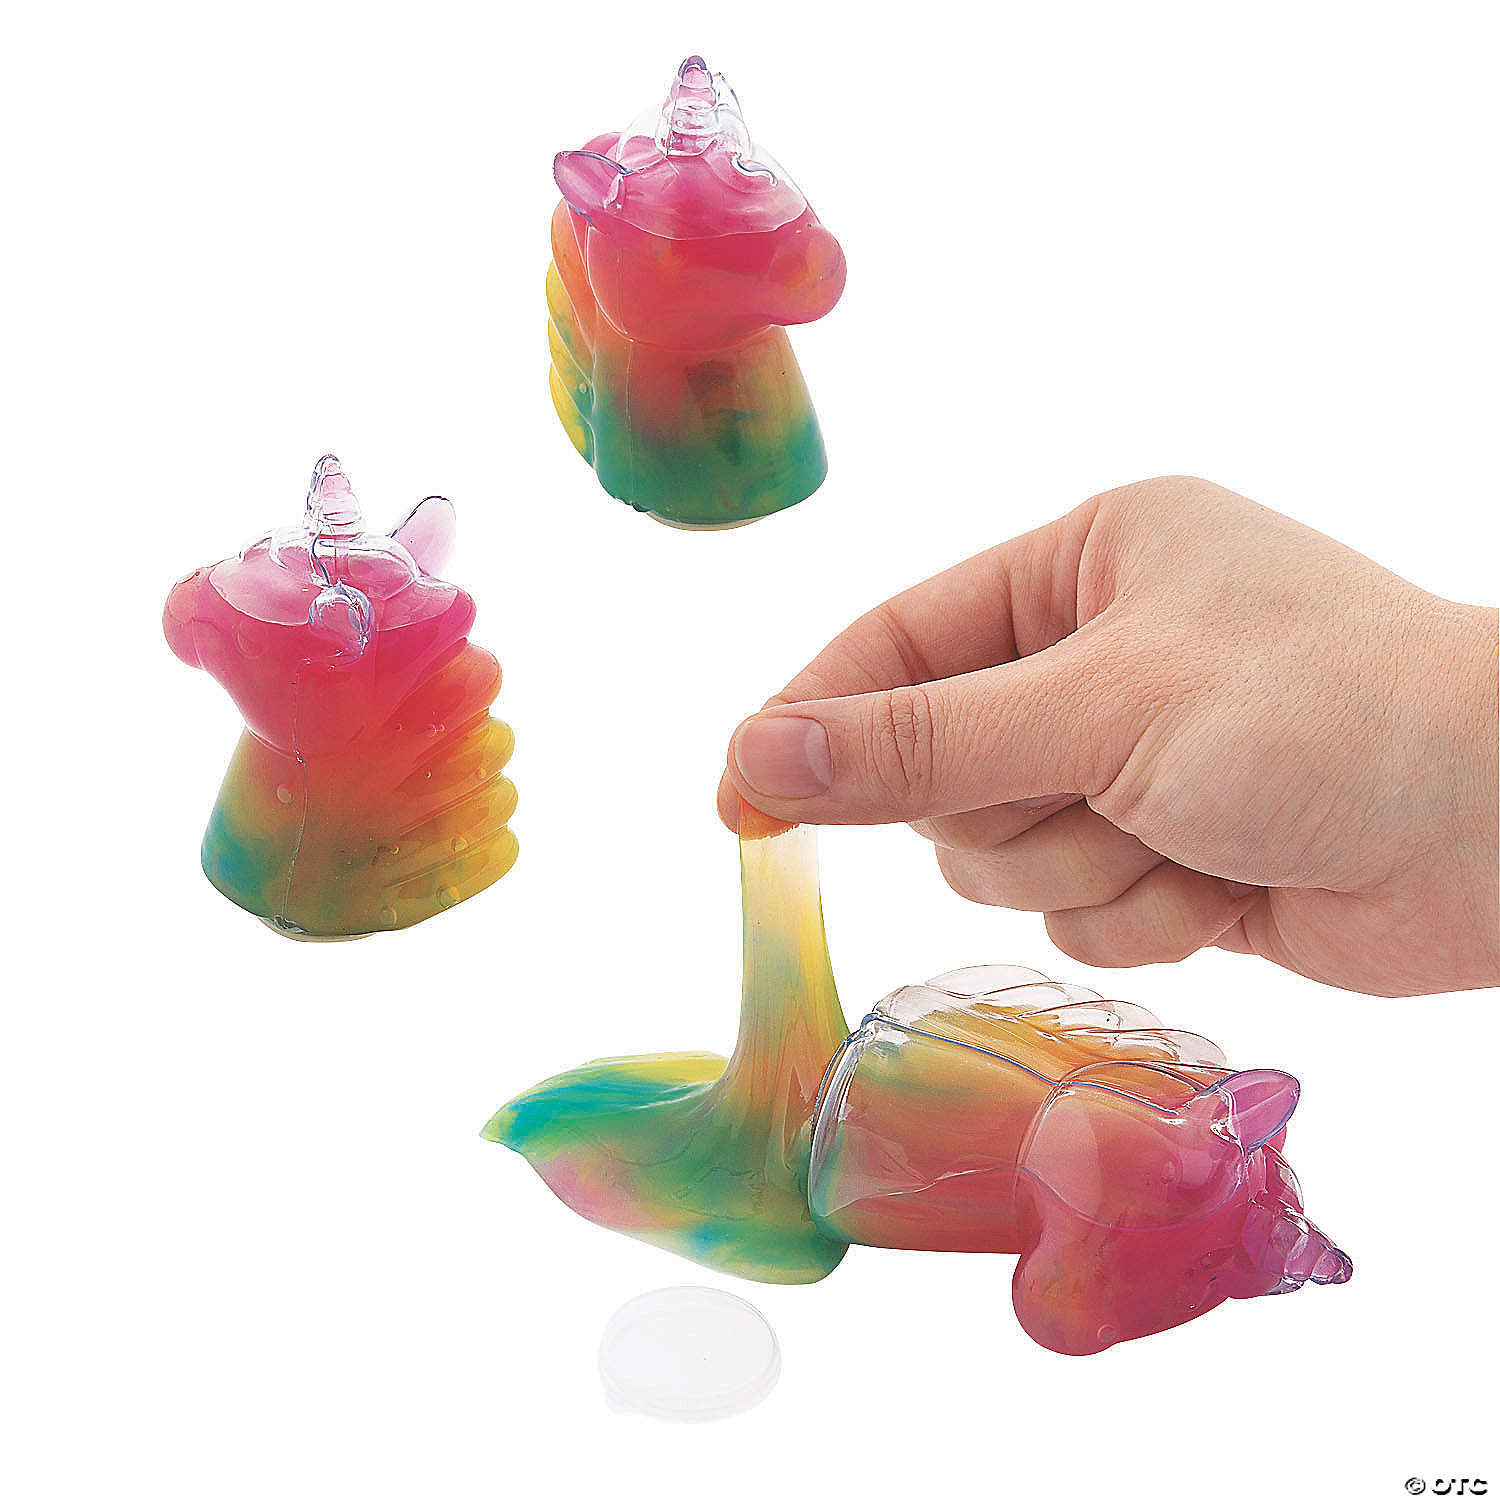 Unicorn Slime Play Girls Pool Party Gift Toy 